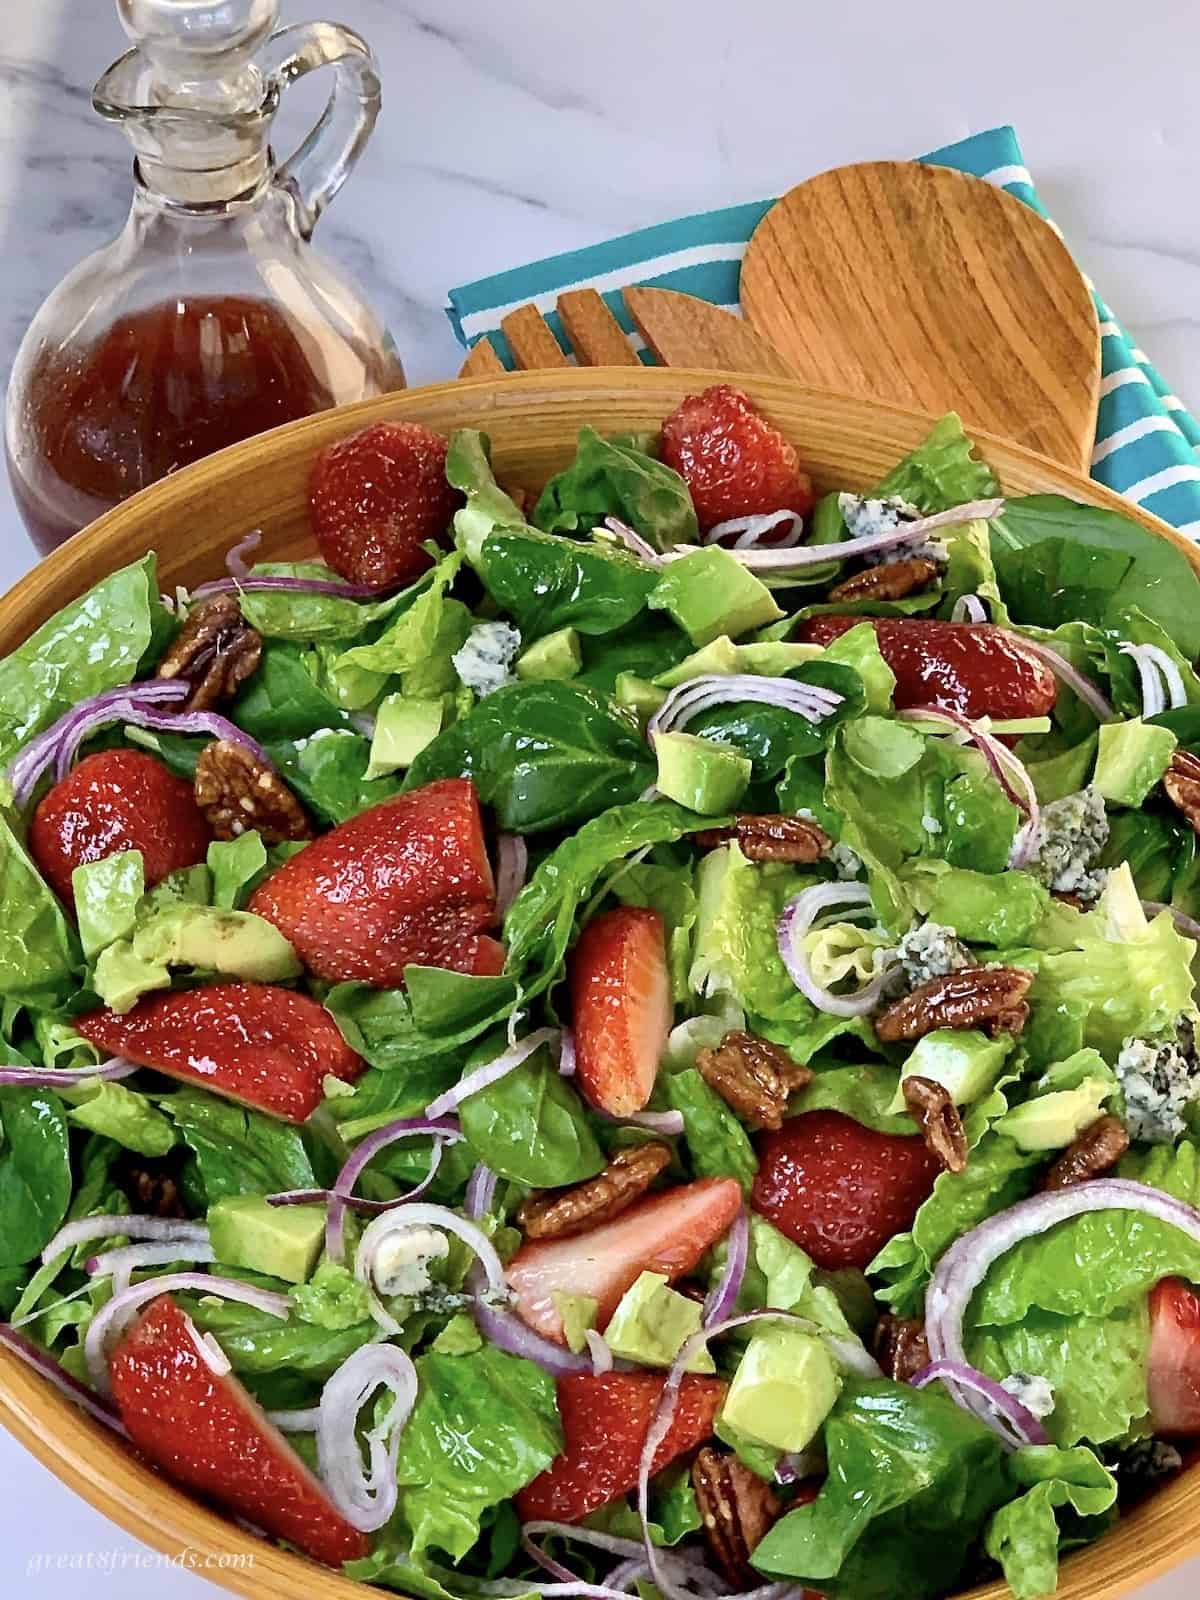 This mixed green salad with strawberries is refreshing and flavorful.